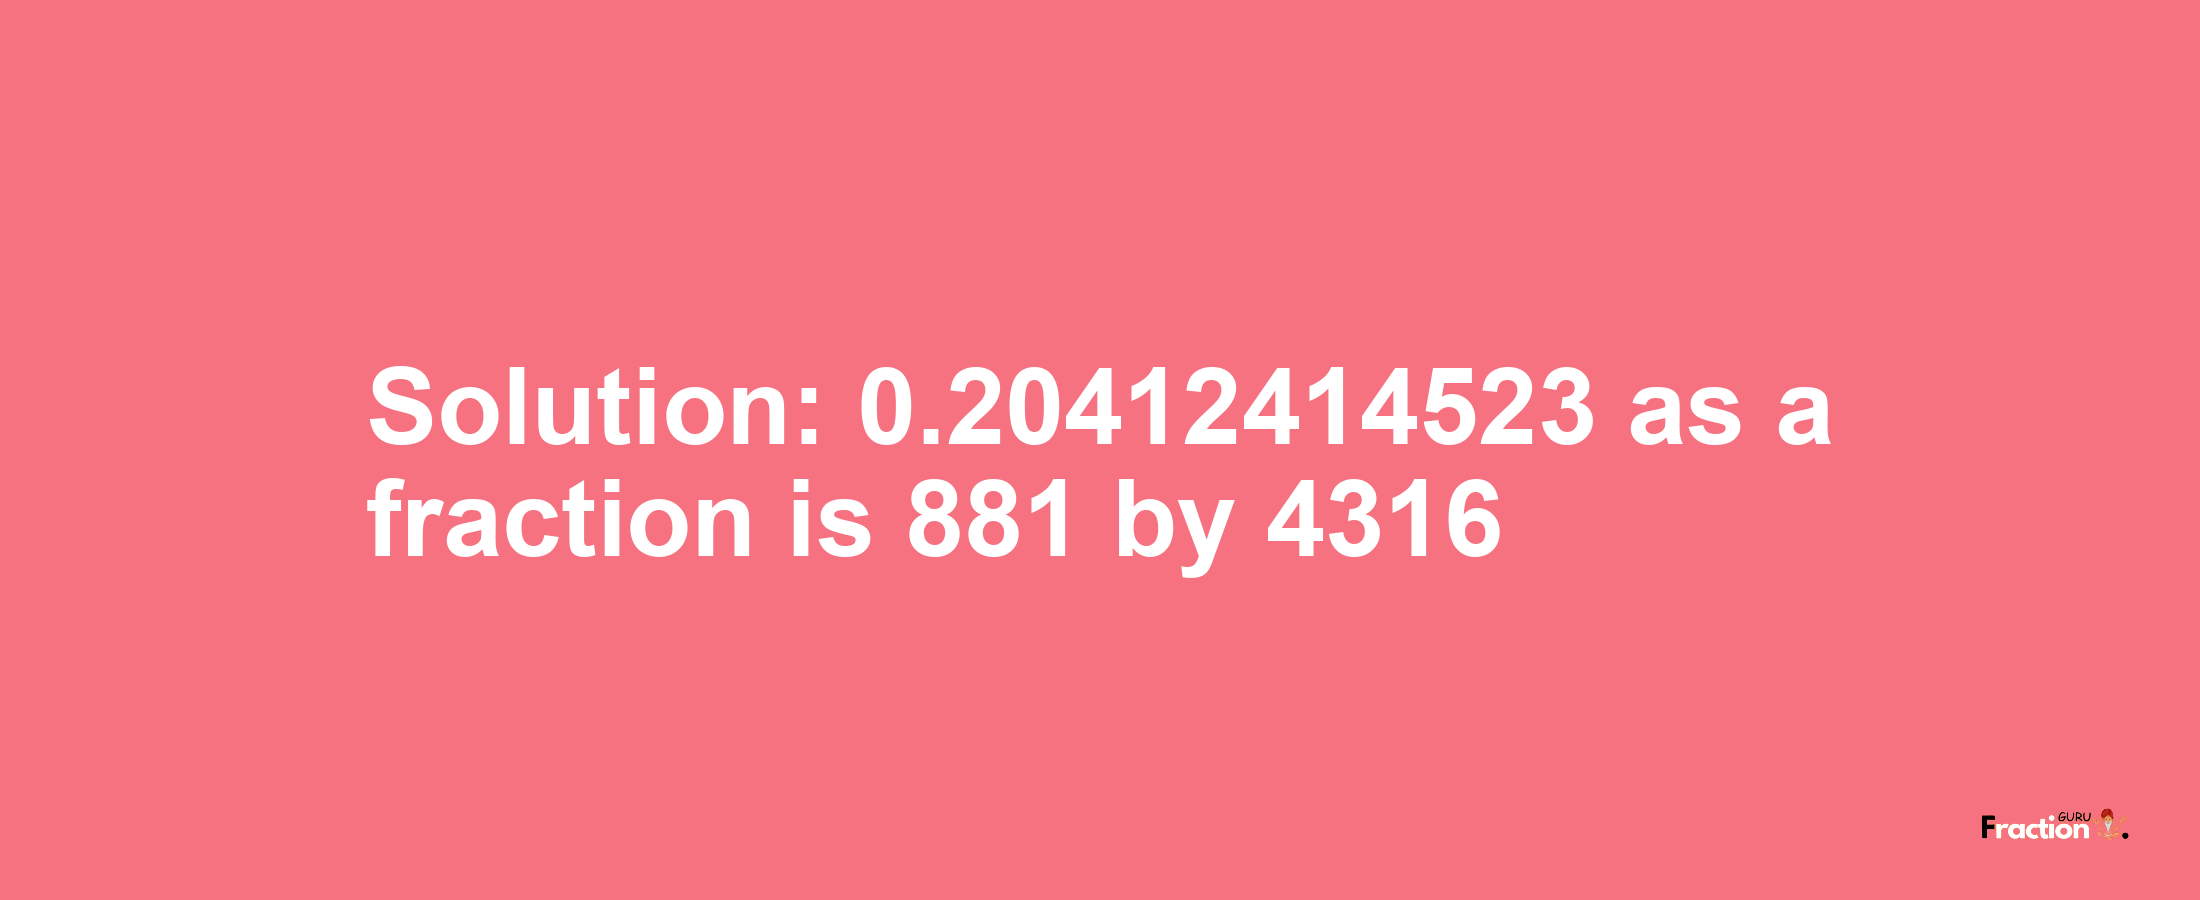 Solution:0.20412414523 as a fraction is 881/4316